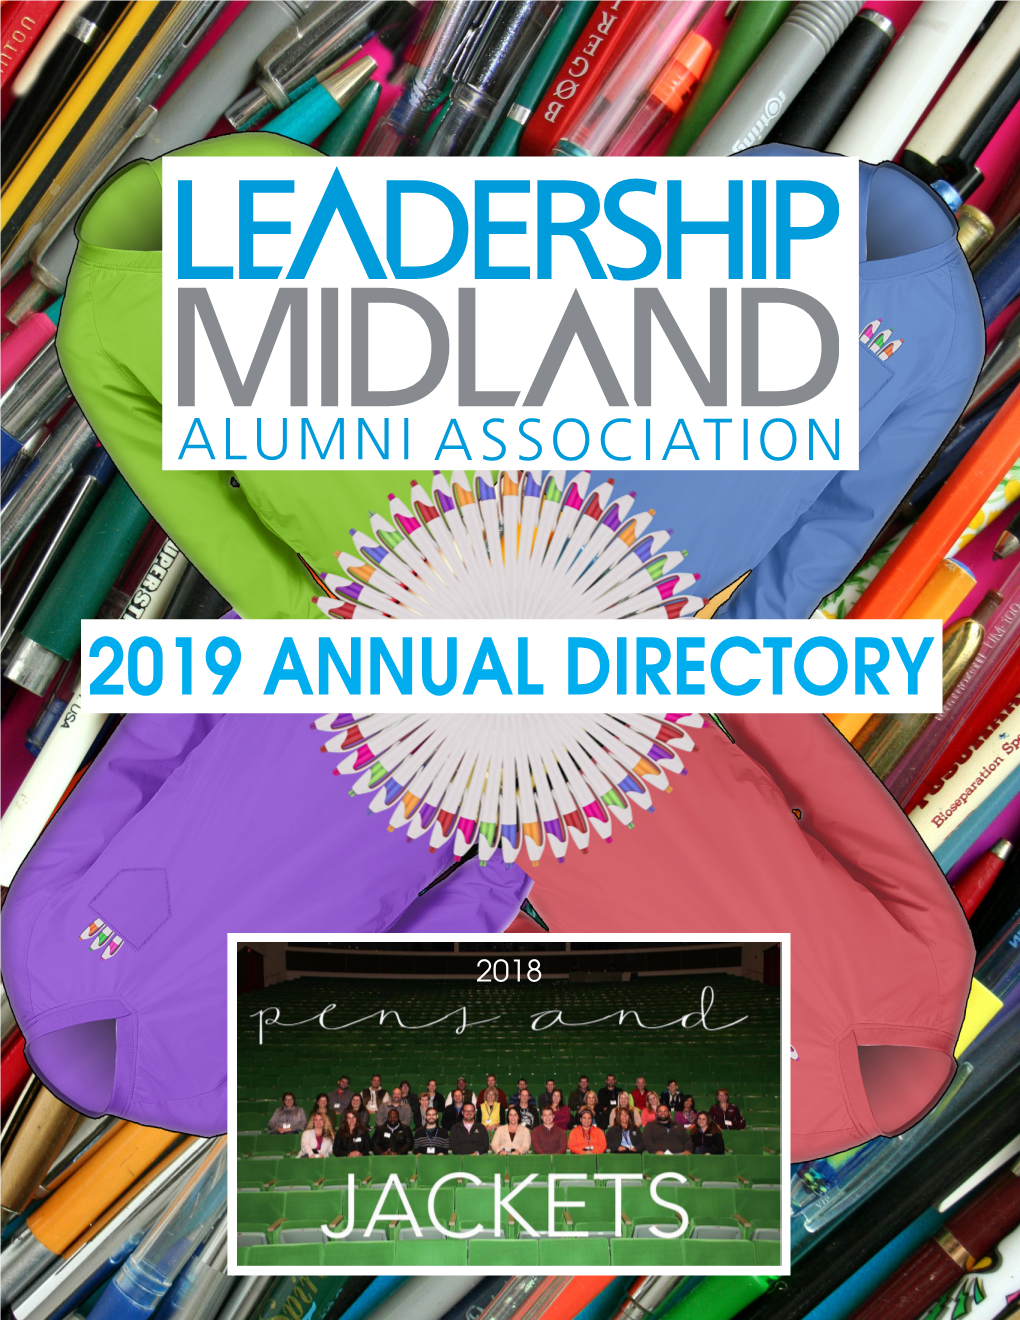 2019 Annual Directory